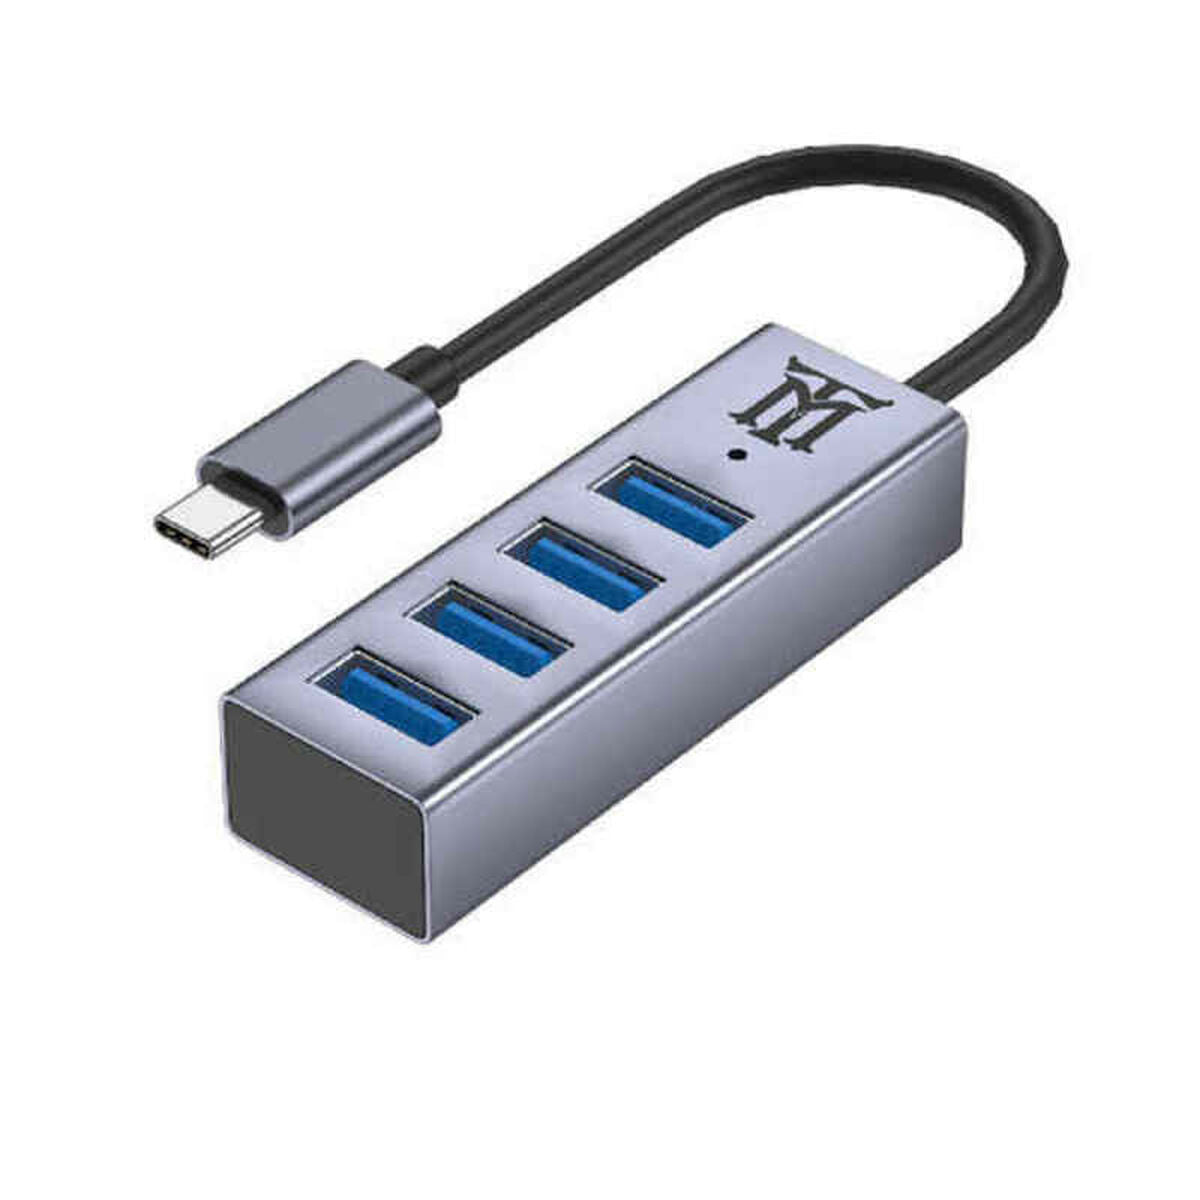 USB Hub Maillon Technologique MTHUB4, Maillon Technologique, Computing, Network devices, usb-hub-maillon-technologique-mthub4, Brand_Maillon Technologique, category-reference-2609, category-reference-2803, category-reference-2829, category-reference-t-19685, category-reference-t-19914, Condition_NEW, networks/wiring, Price_20 - 50, Teleworking, RiotNook